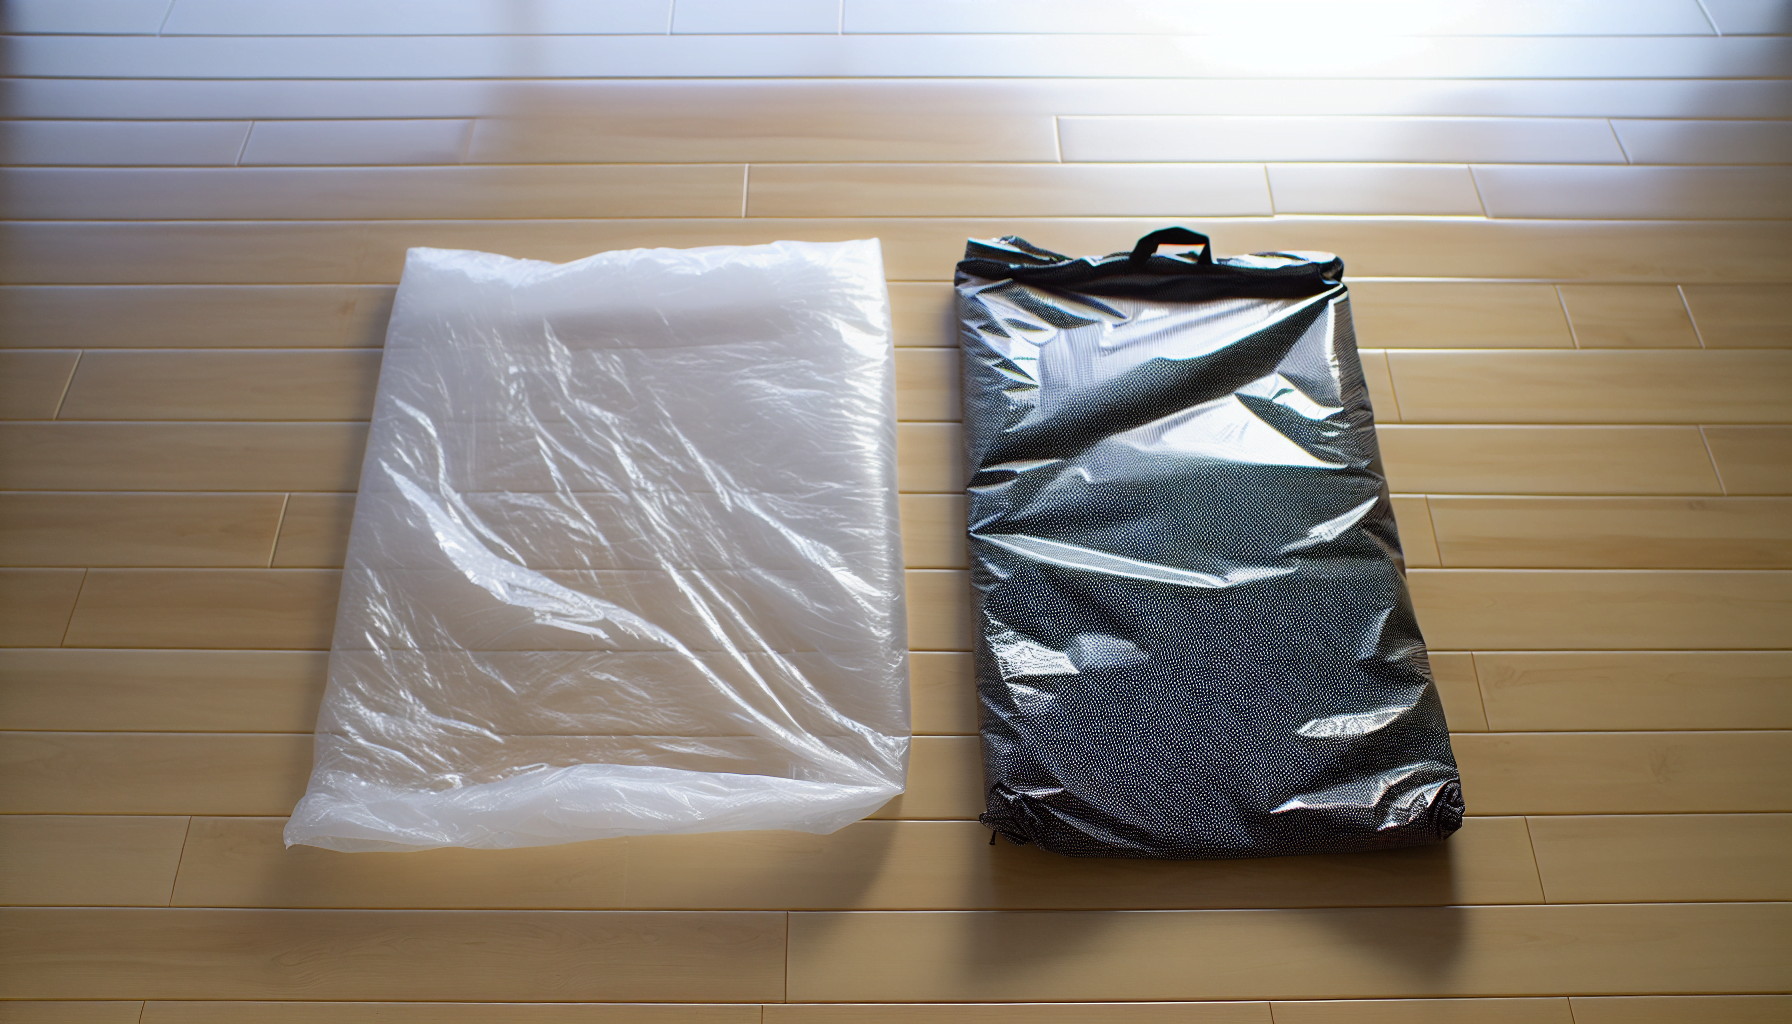 Where Can I Buy a Mattress Disposal Bag? – Find Durable Options Near You